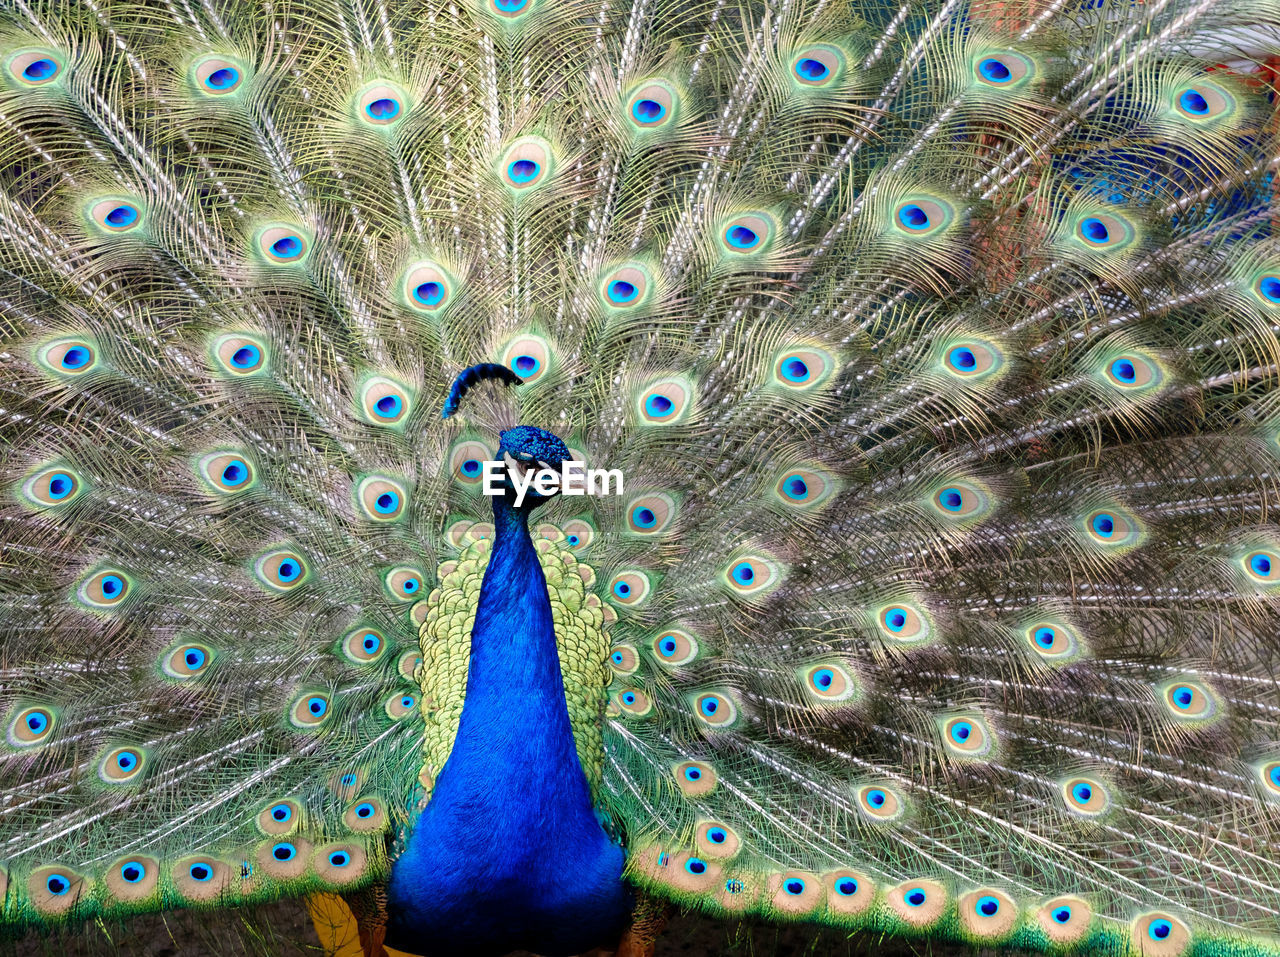 Fanned out peacock